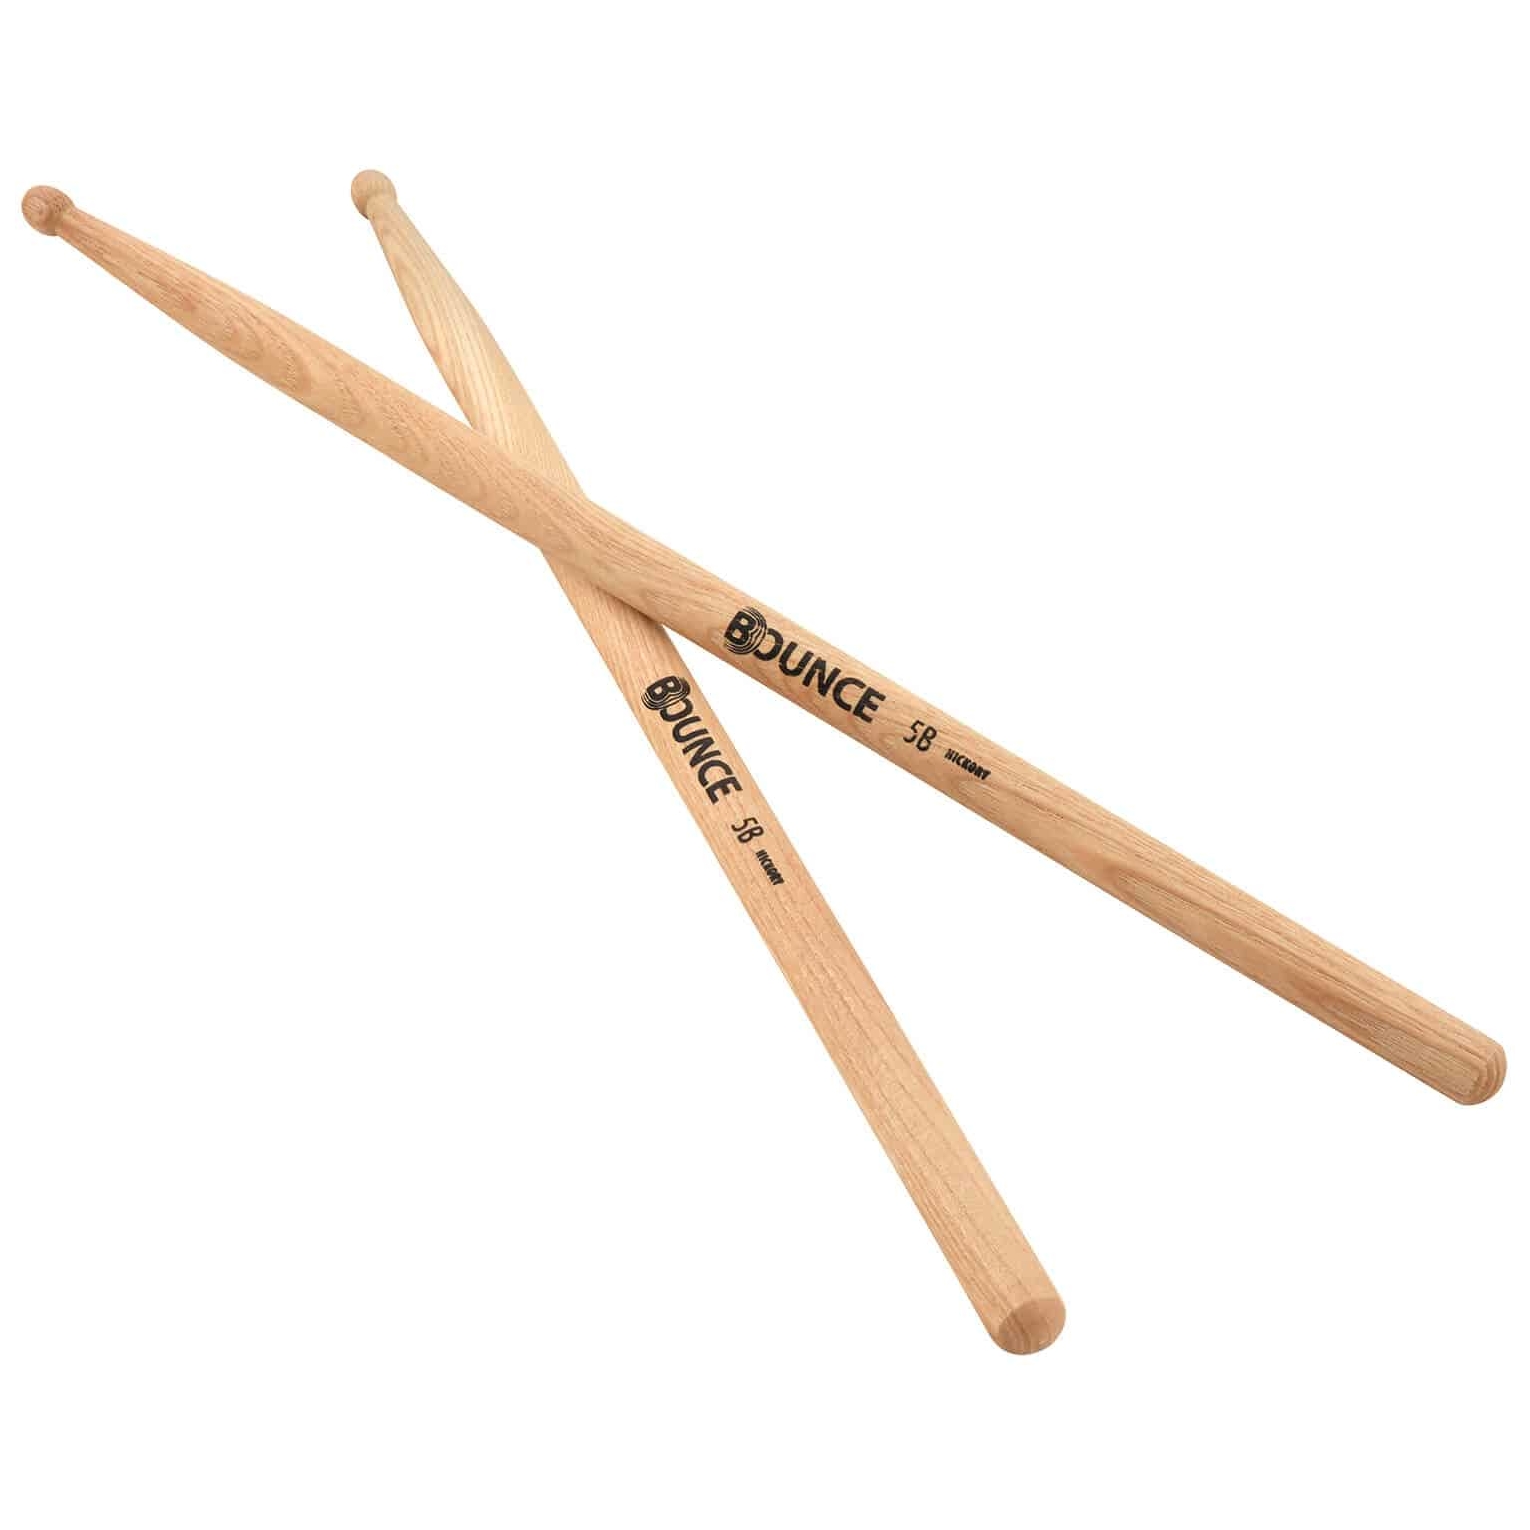 Bounce 5B Drumsticks - Hickory - Wood Tip